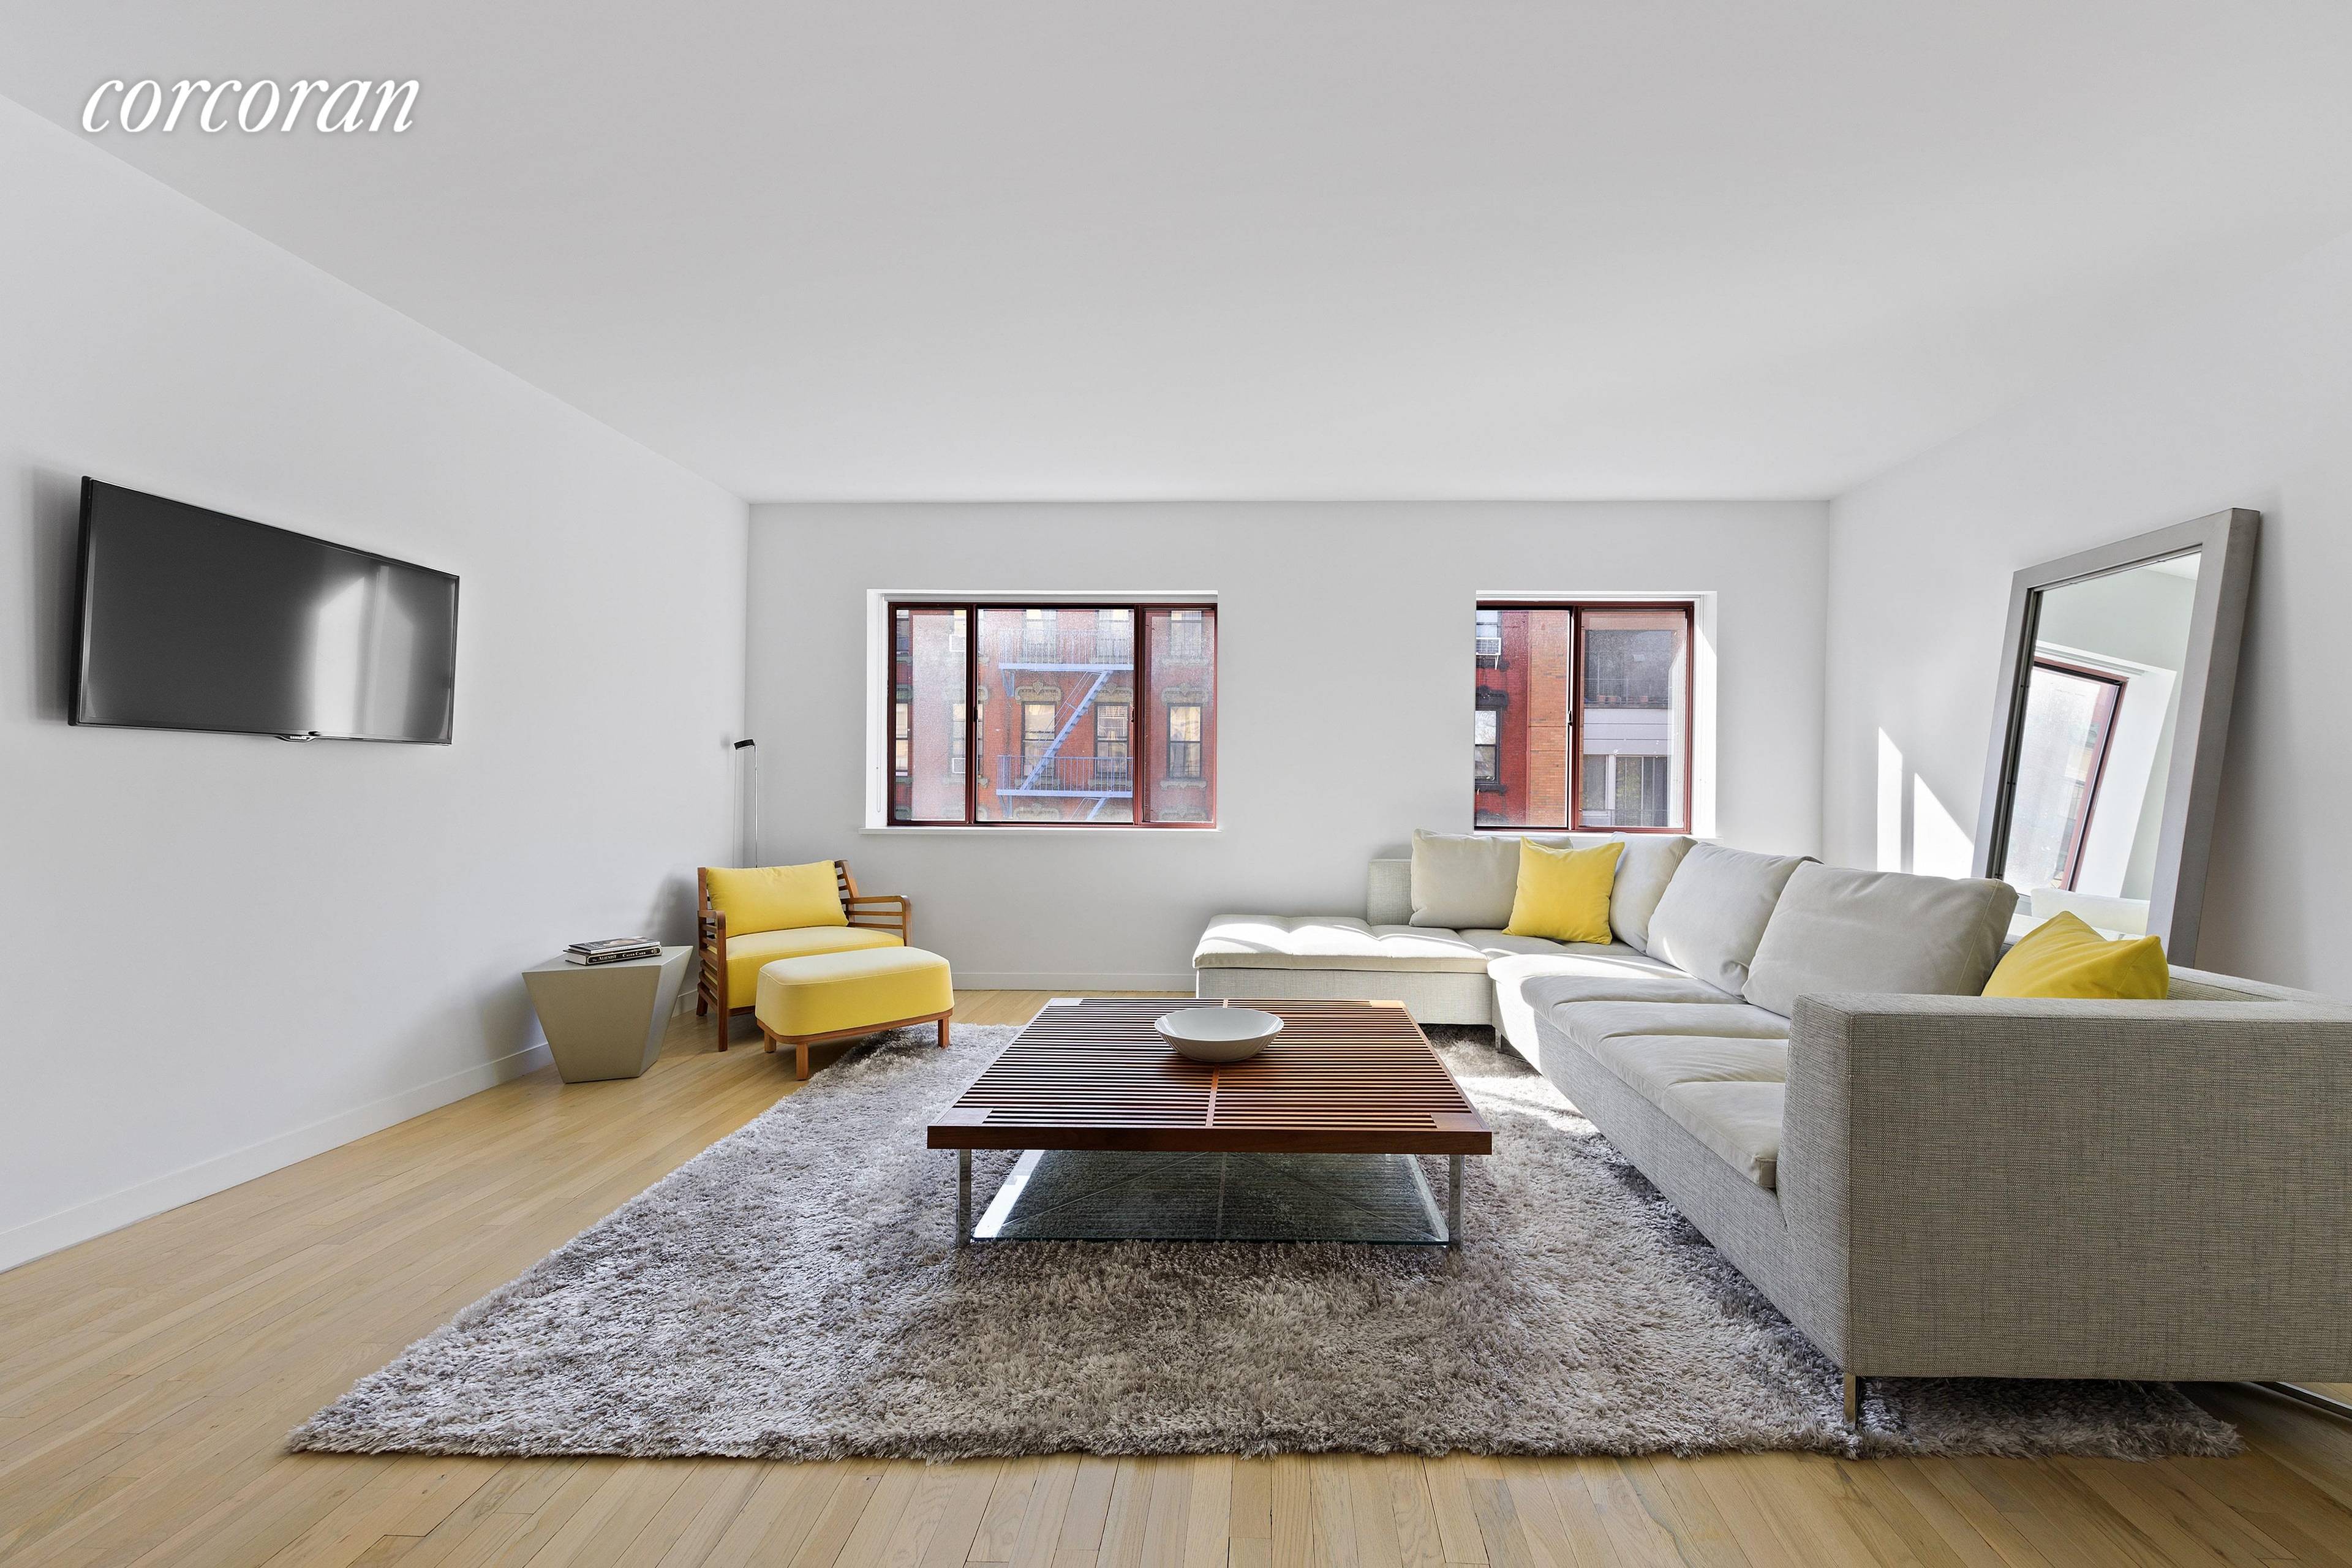 New to Alphabet City in the vibrant East Village and just steps from Tompkins Square Park is this gracious 1, 054 square foot 2 bedroom, 2 bathroom CONDOMINIUM at 217 ...